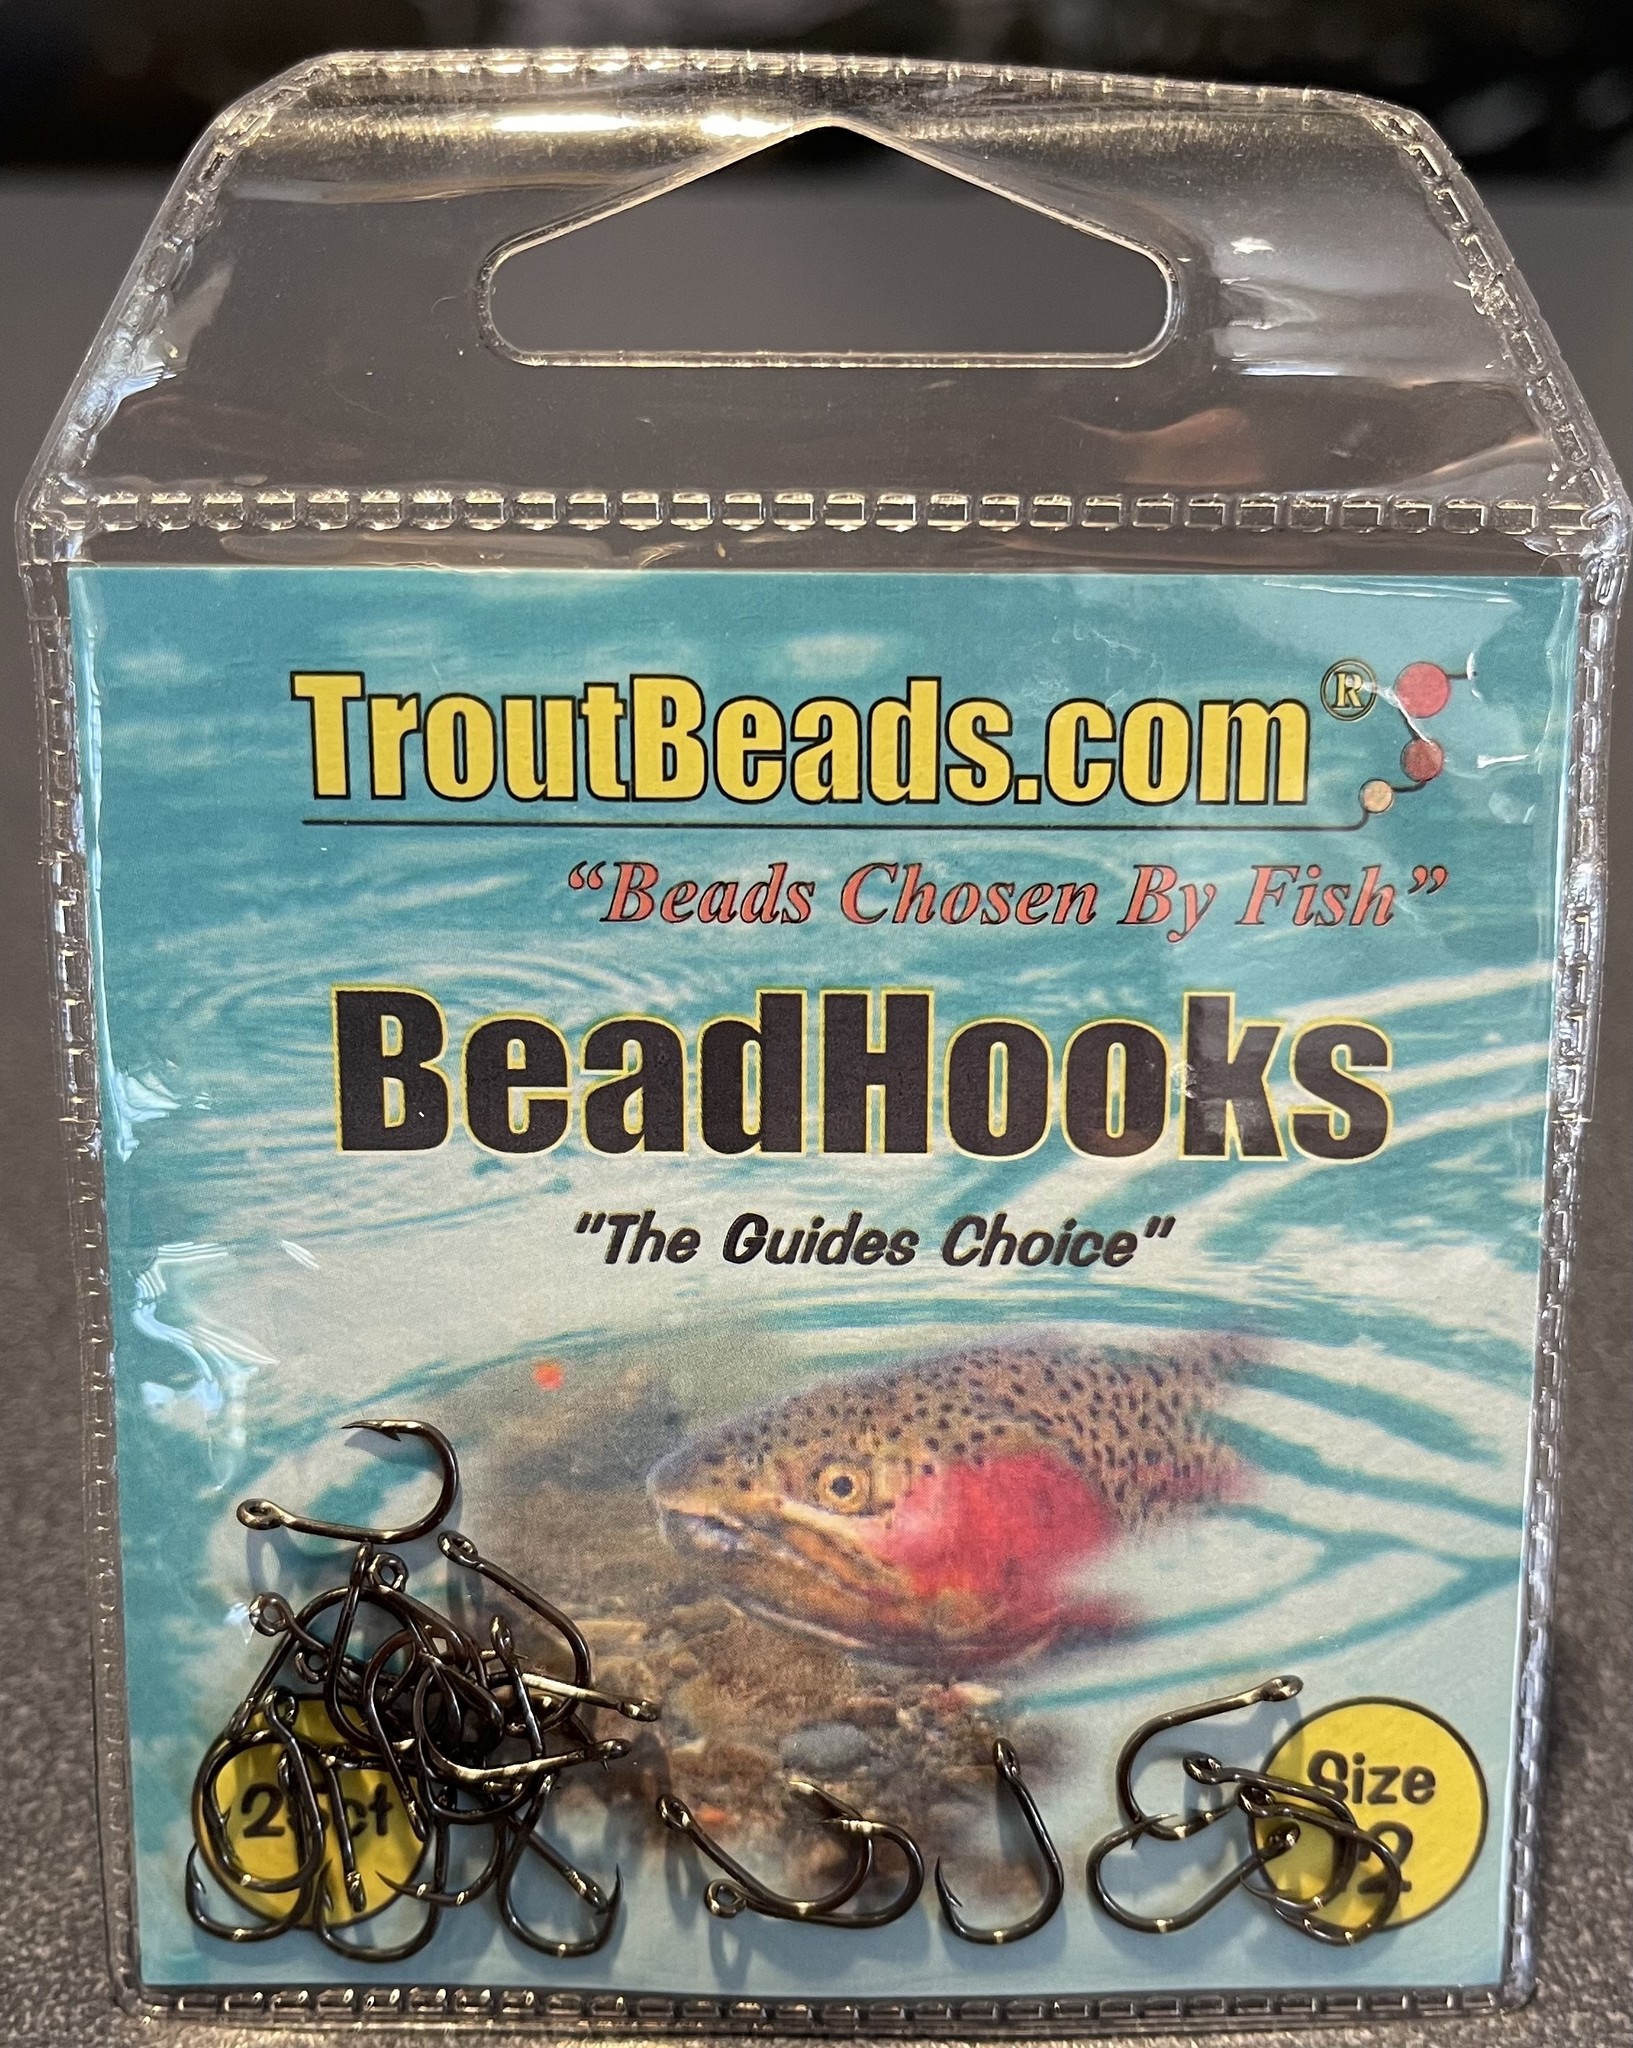 Troutbeads size 12 - 25 pack beadhooks